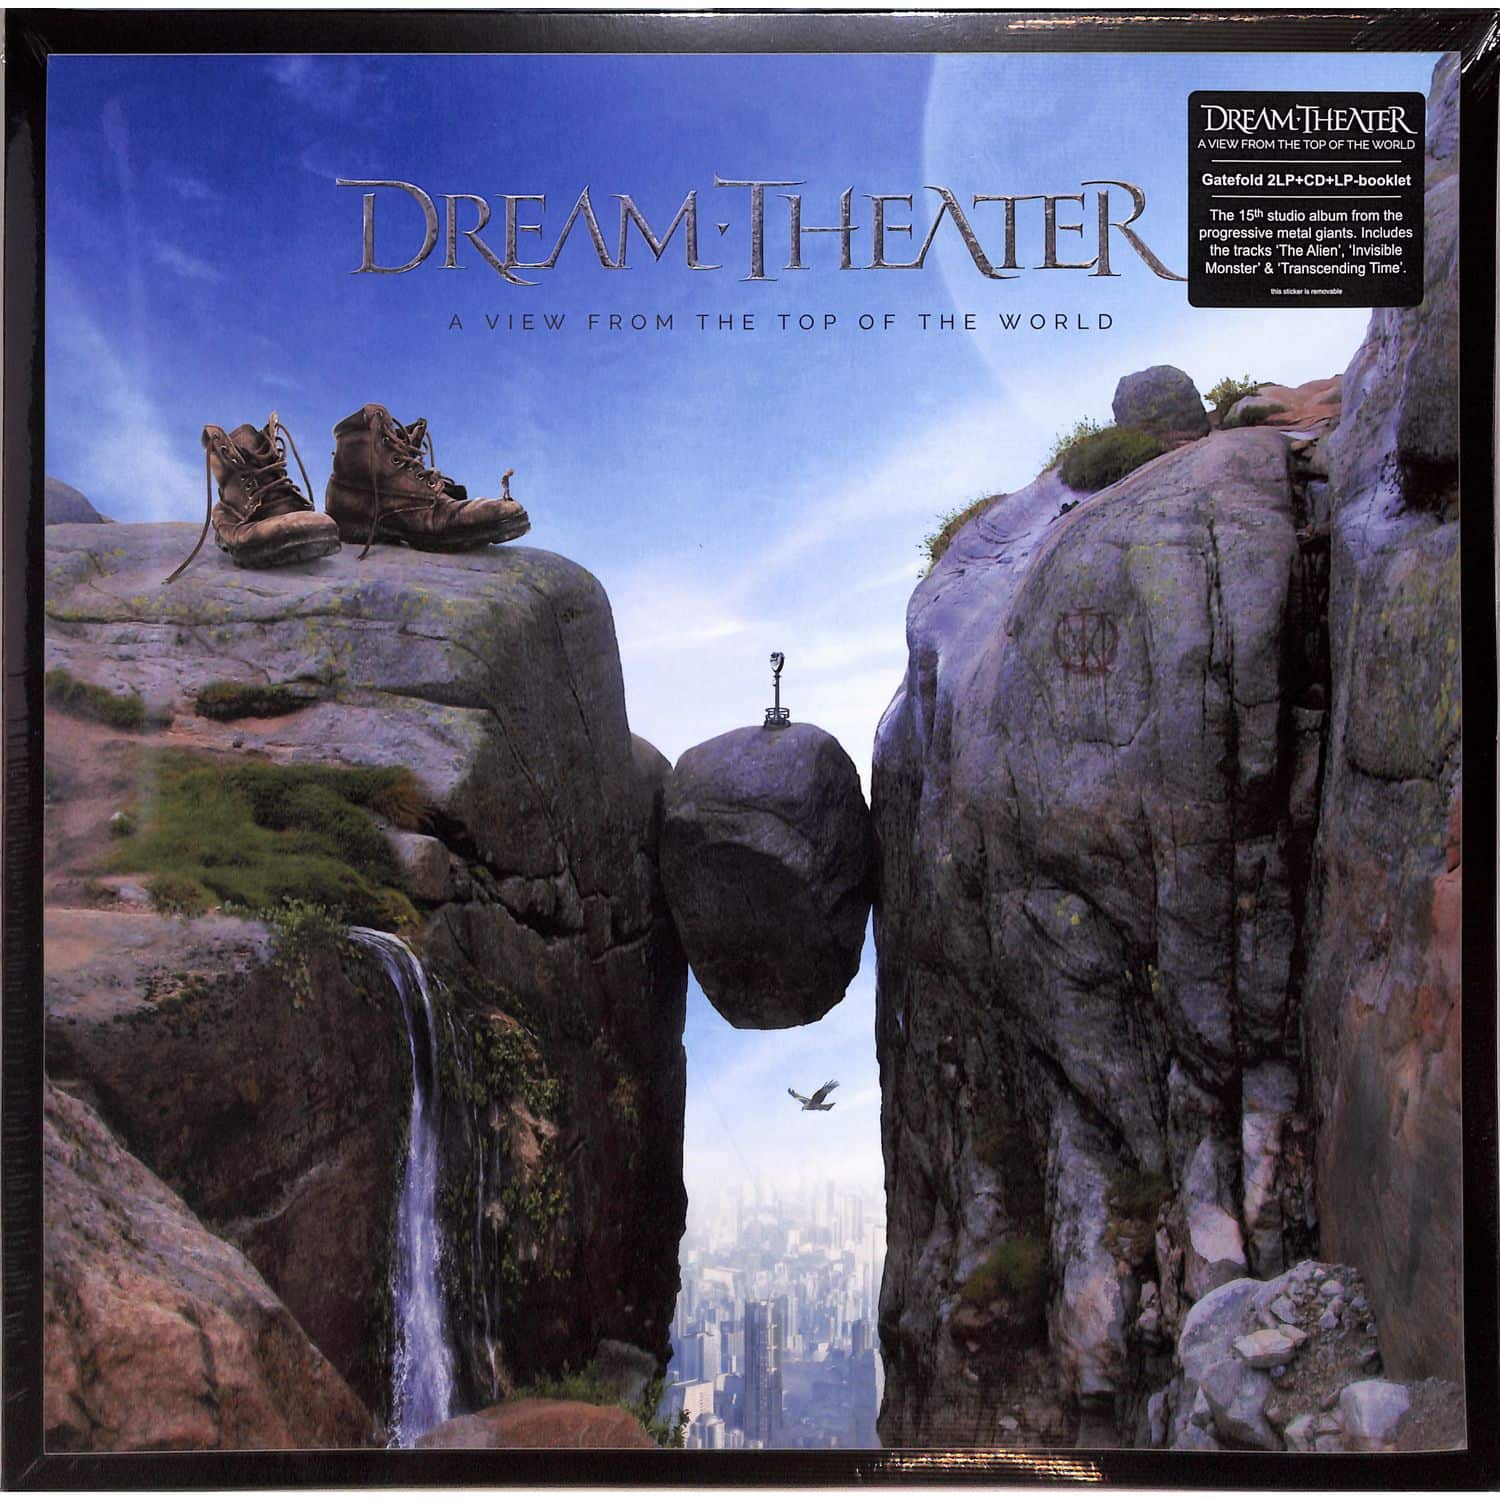 Dream Theater - A VIEW FROM THE TOP OF THE WORLD